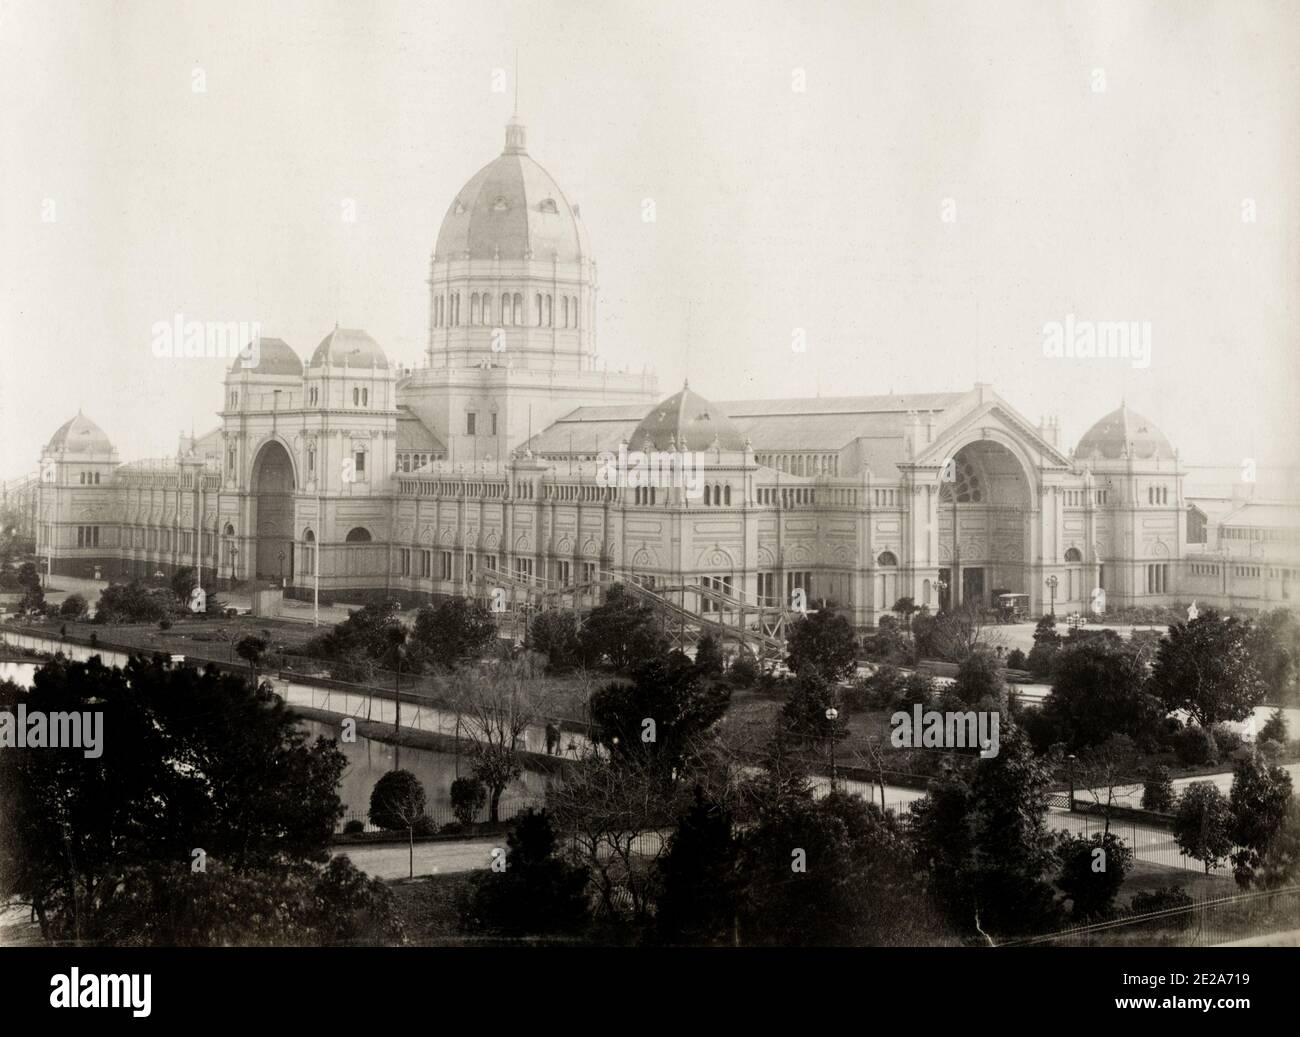 Vintage 19th century photograph: The Royal Exhibition Building is a World Heritage-listed building in Melbourne, Victoria, Australia, built in 1879-80 Stock Photo